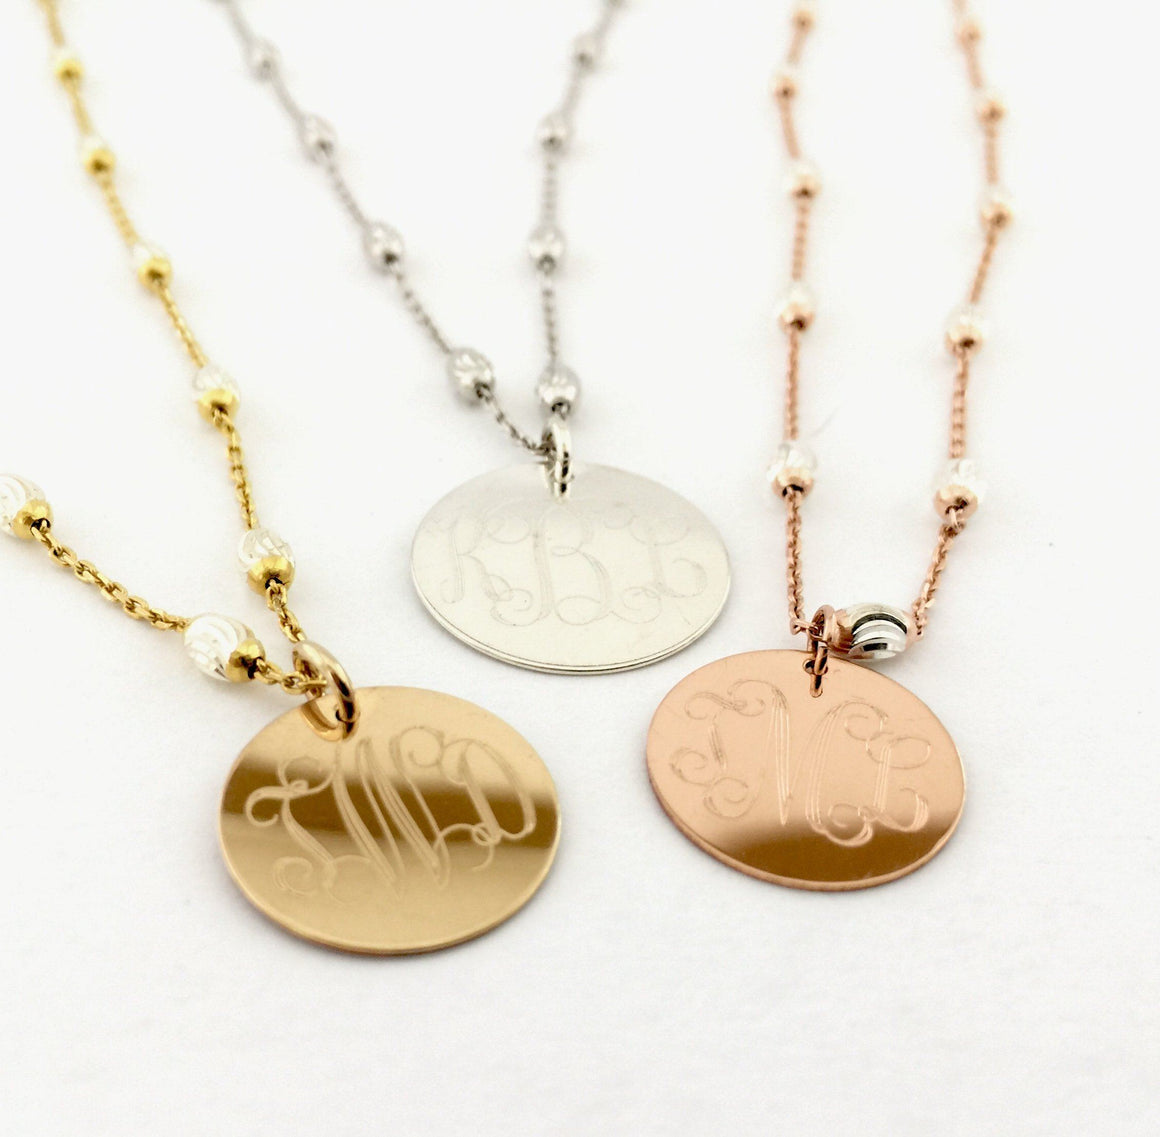 Saturn Chain Monogram Necklace in Silver  or Two-tone Gold Silver, or Rose Gold Silver